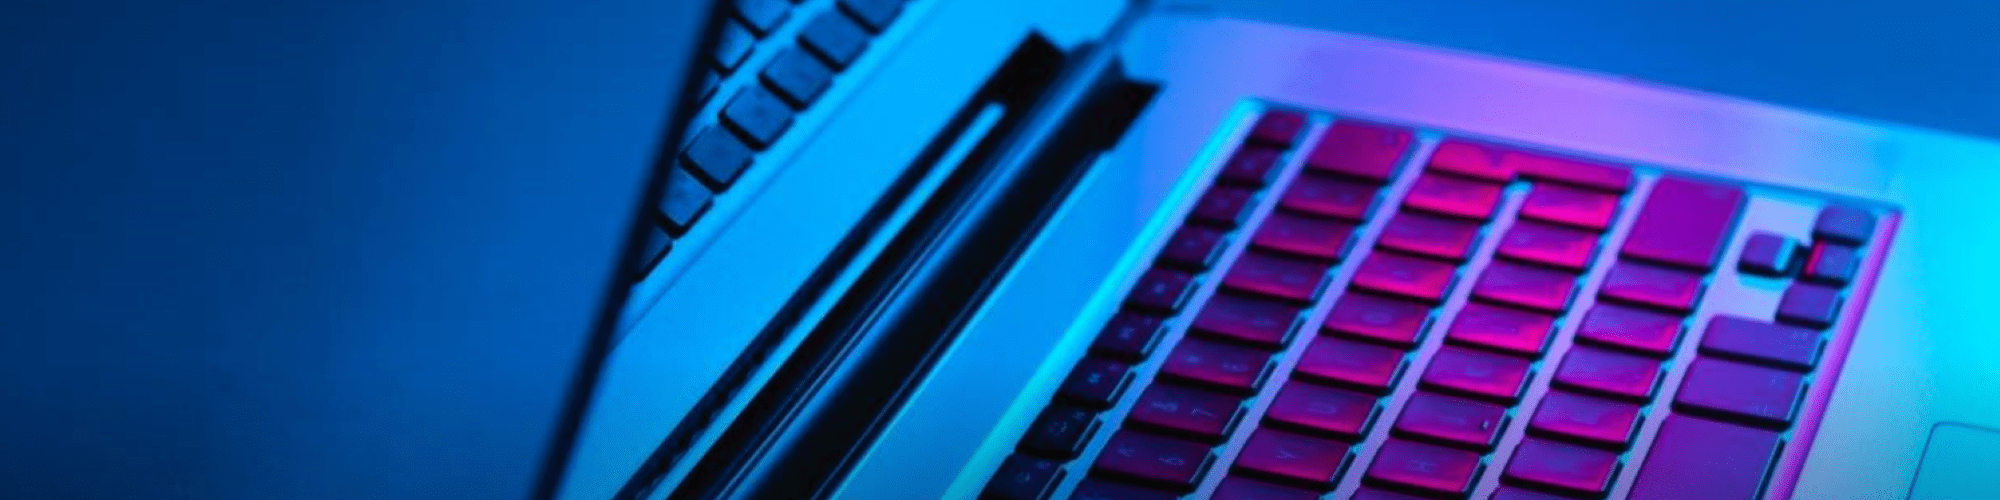  a laptop with a purple glare on the keyboard